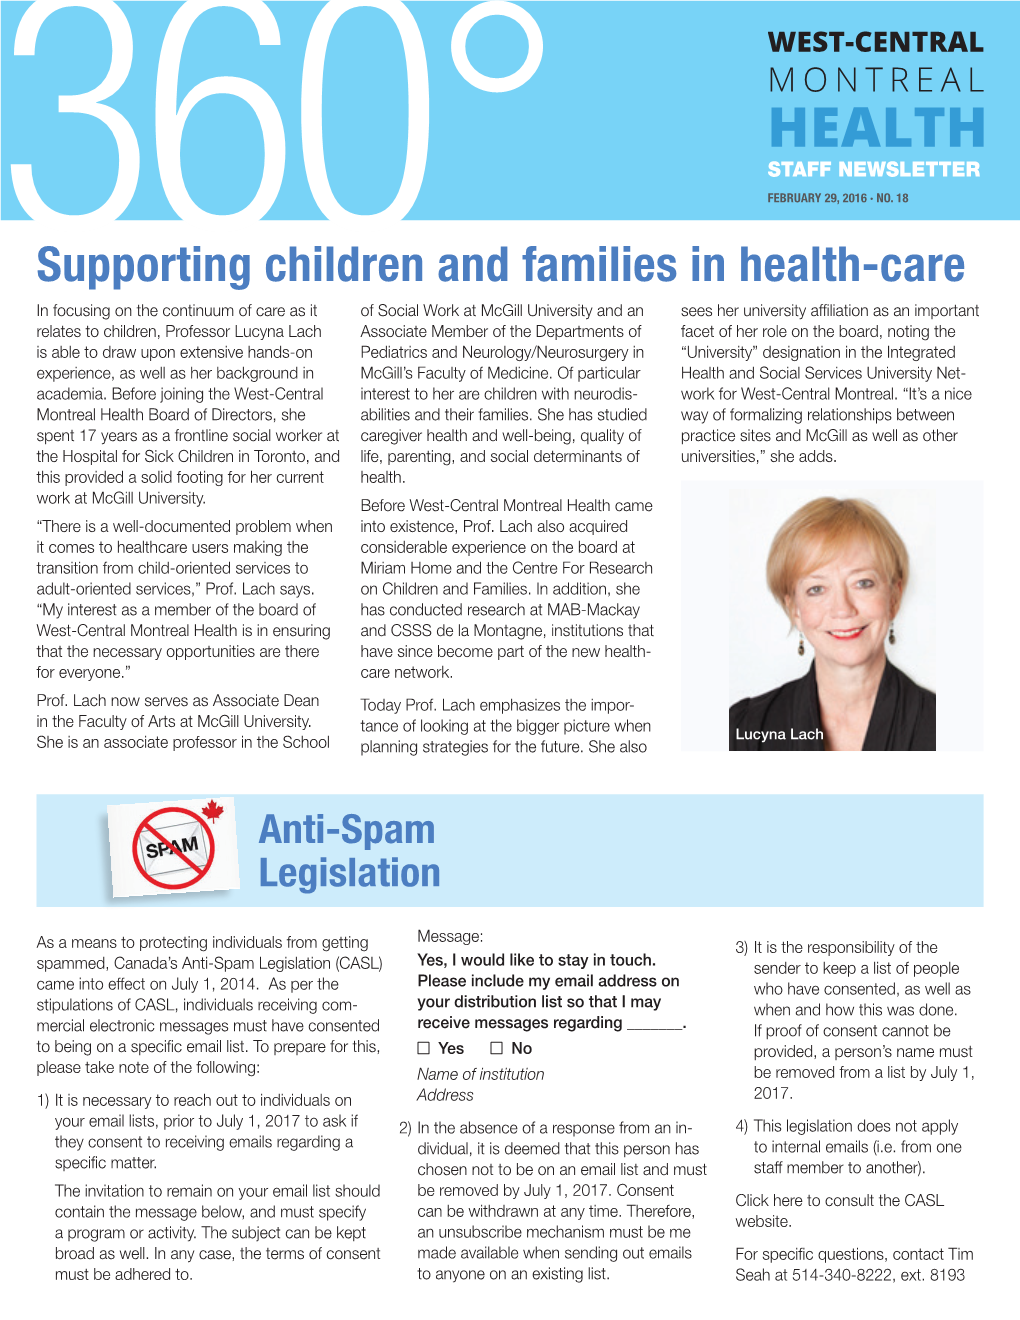 Supporting Children and Families in Health-Care